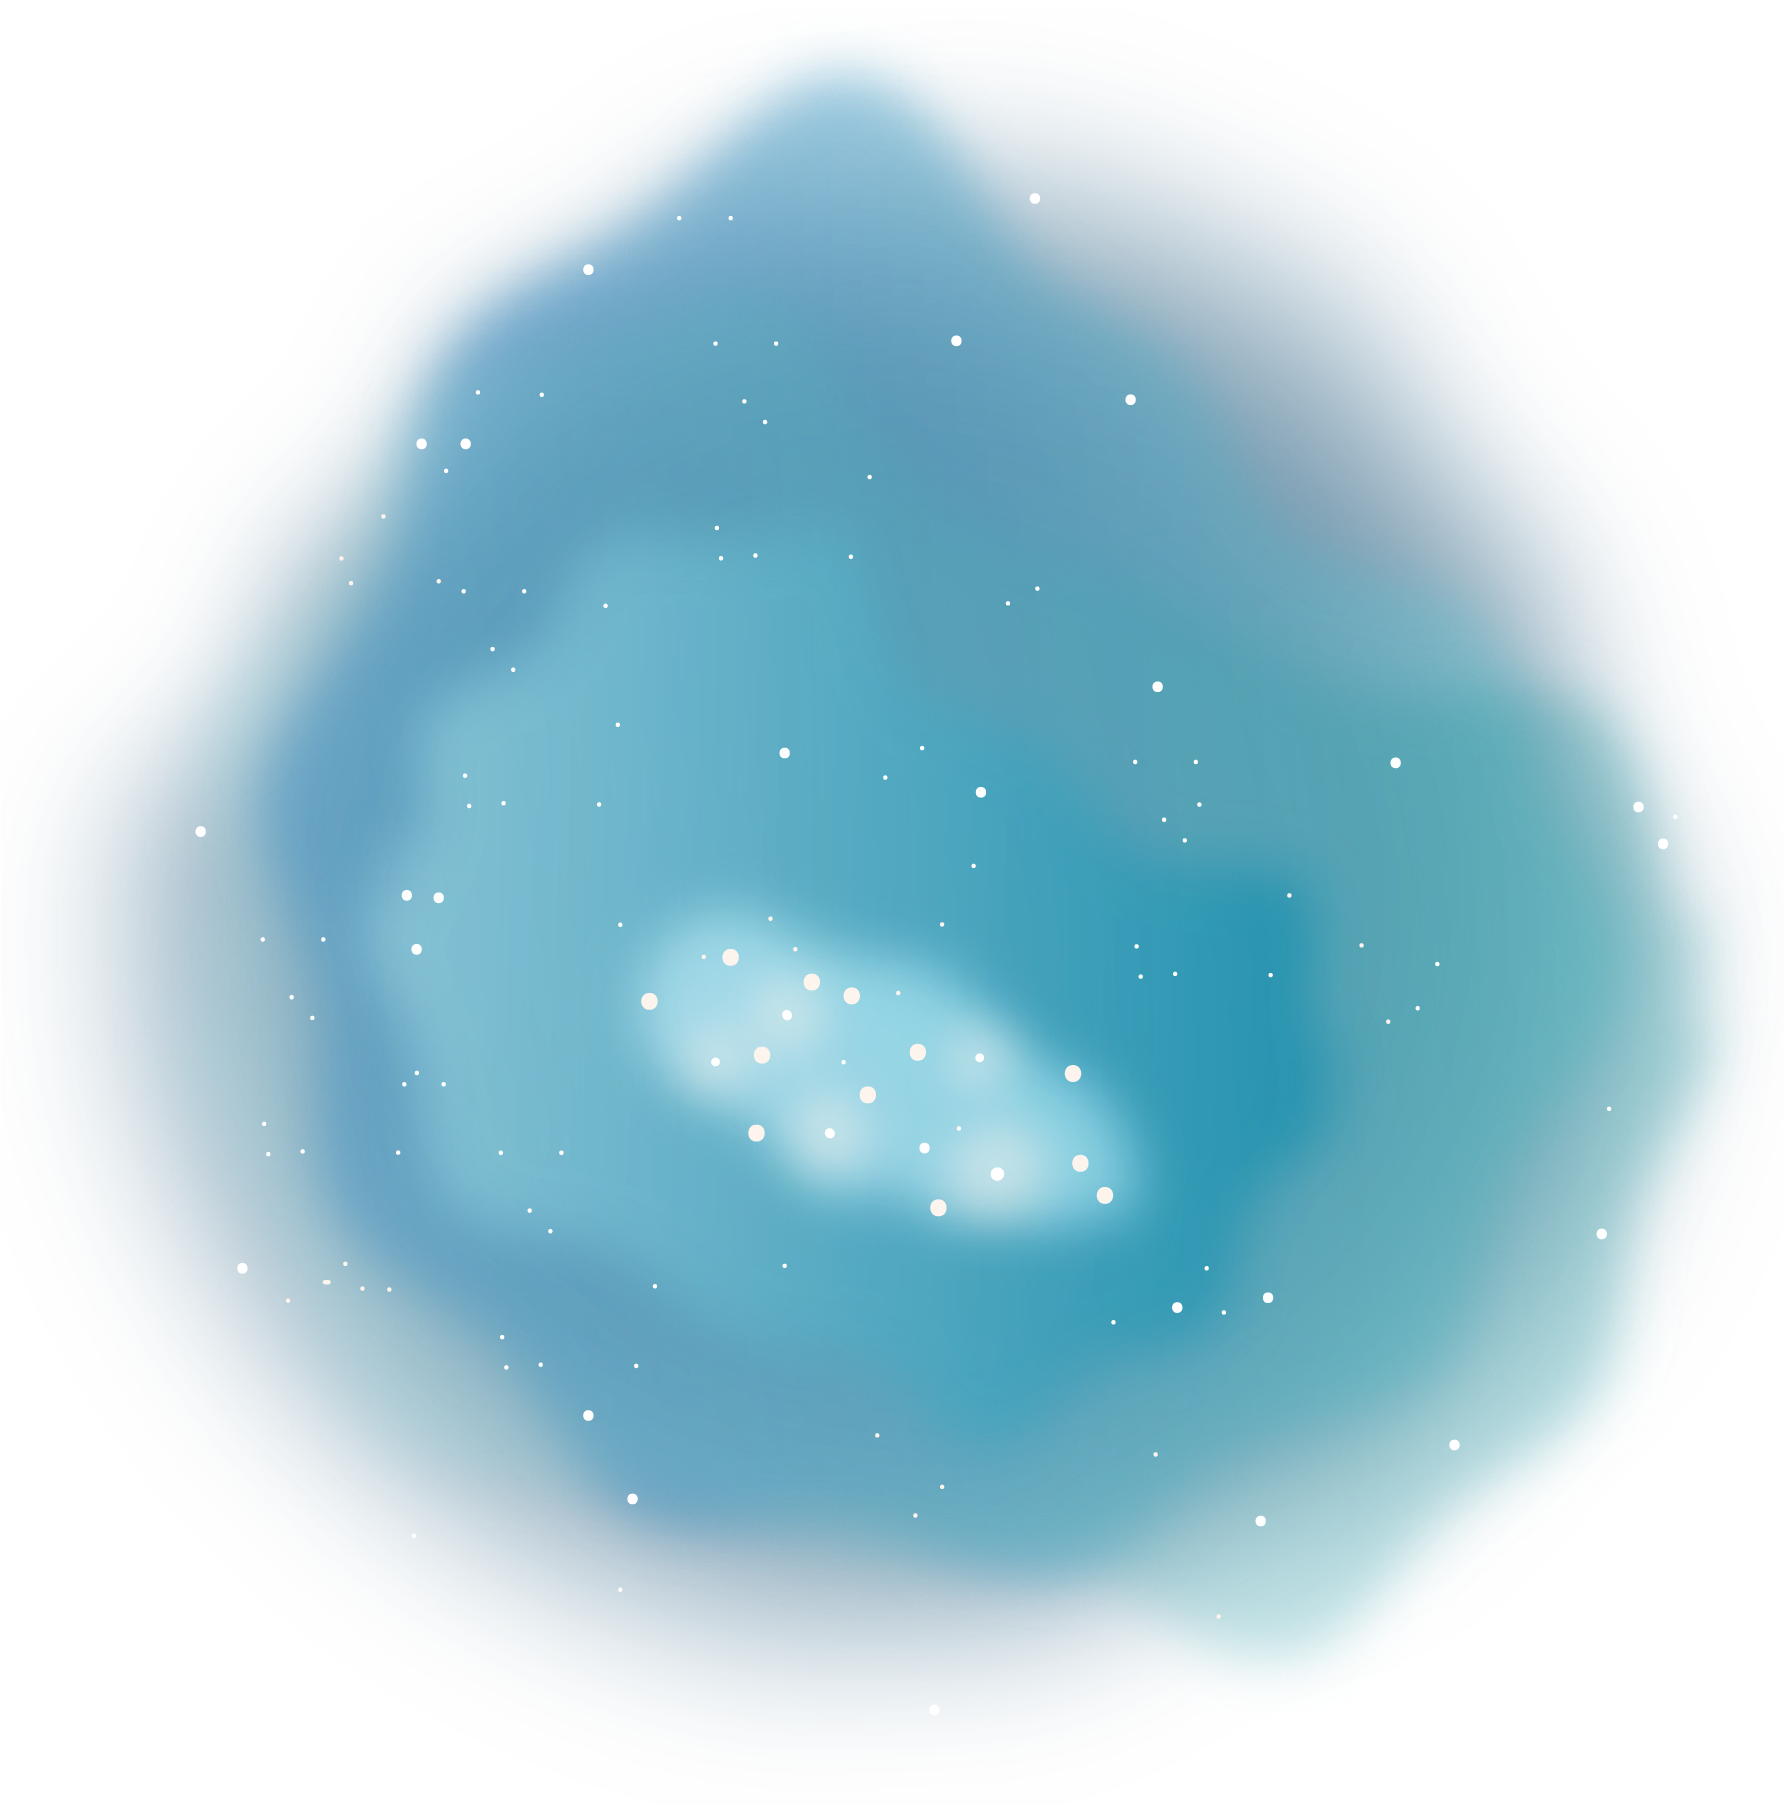 A large, amorphous blob in a subtle tear drop shape has layers of transparent, hazy color overlapping. The different layers are a range of transparent blues, some greener shades than others. While white dots representing stars speckle the whole image, in the center of this shape is a bright white oval cloud with more pronounced and larger stars grouped together.